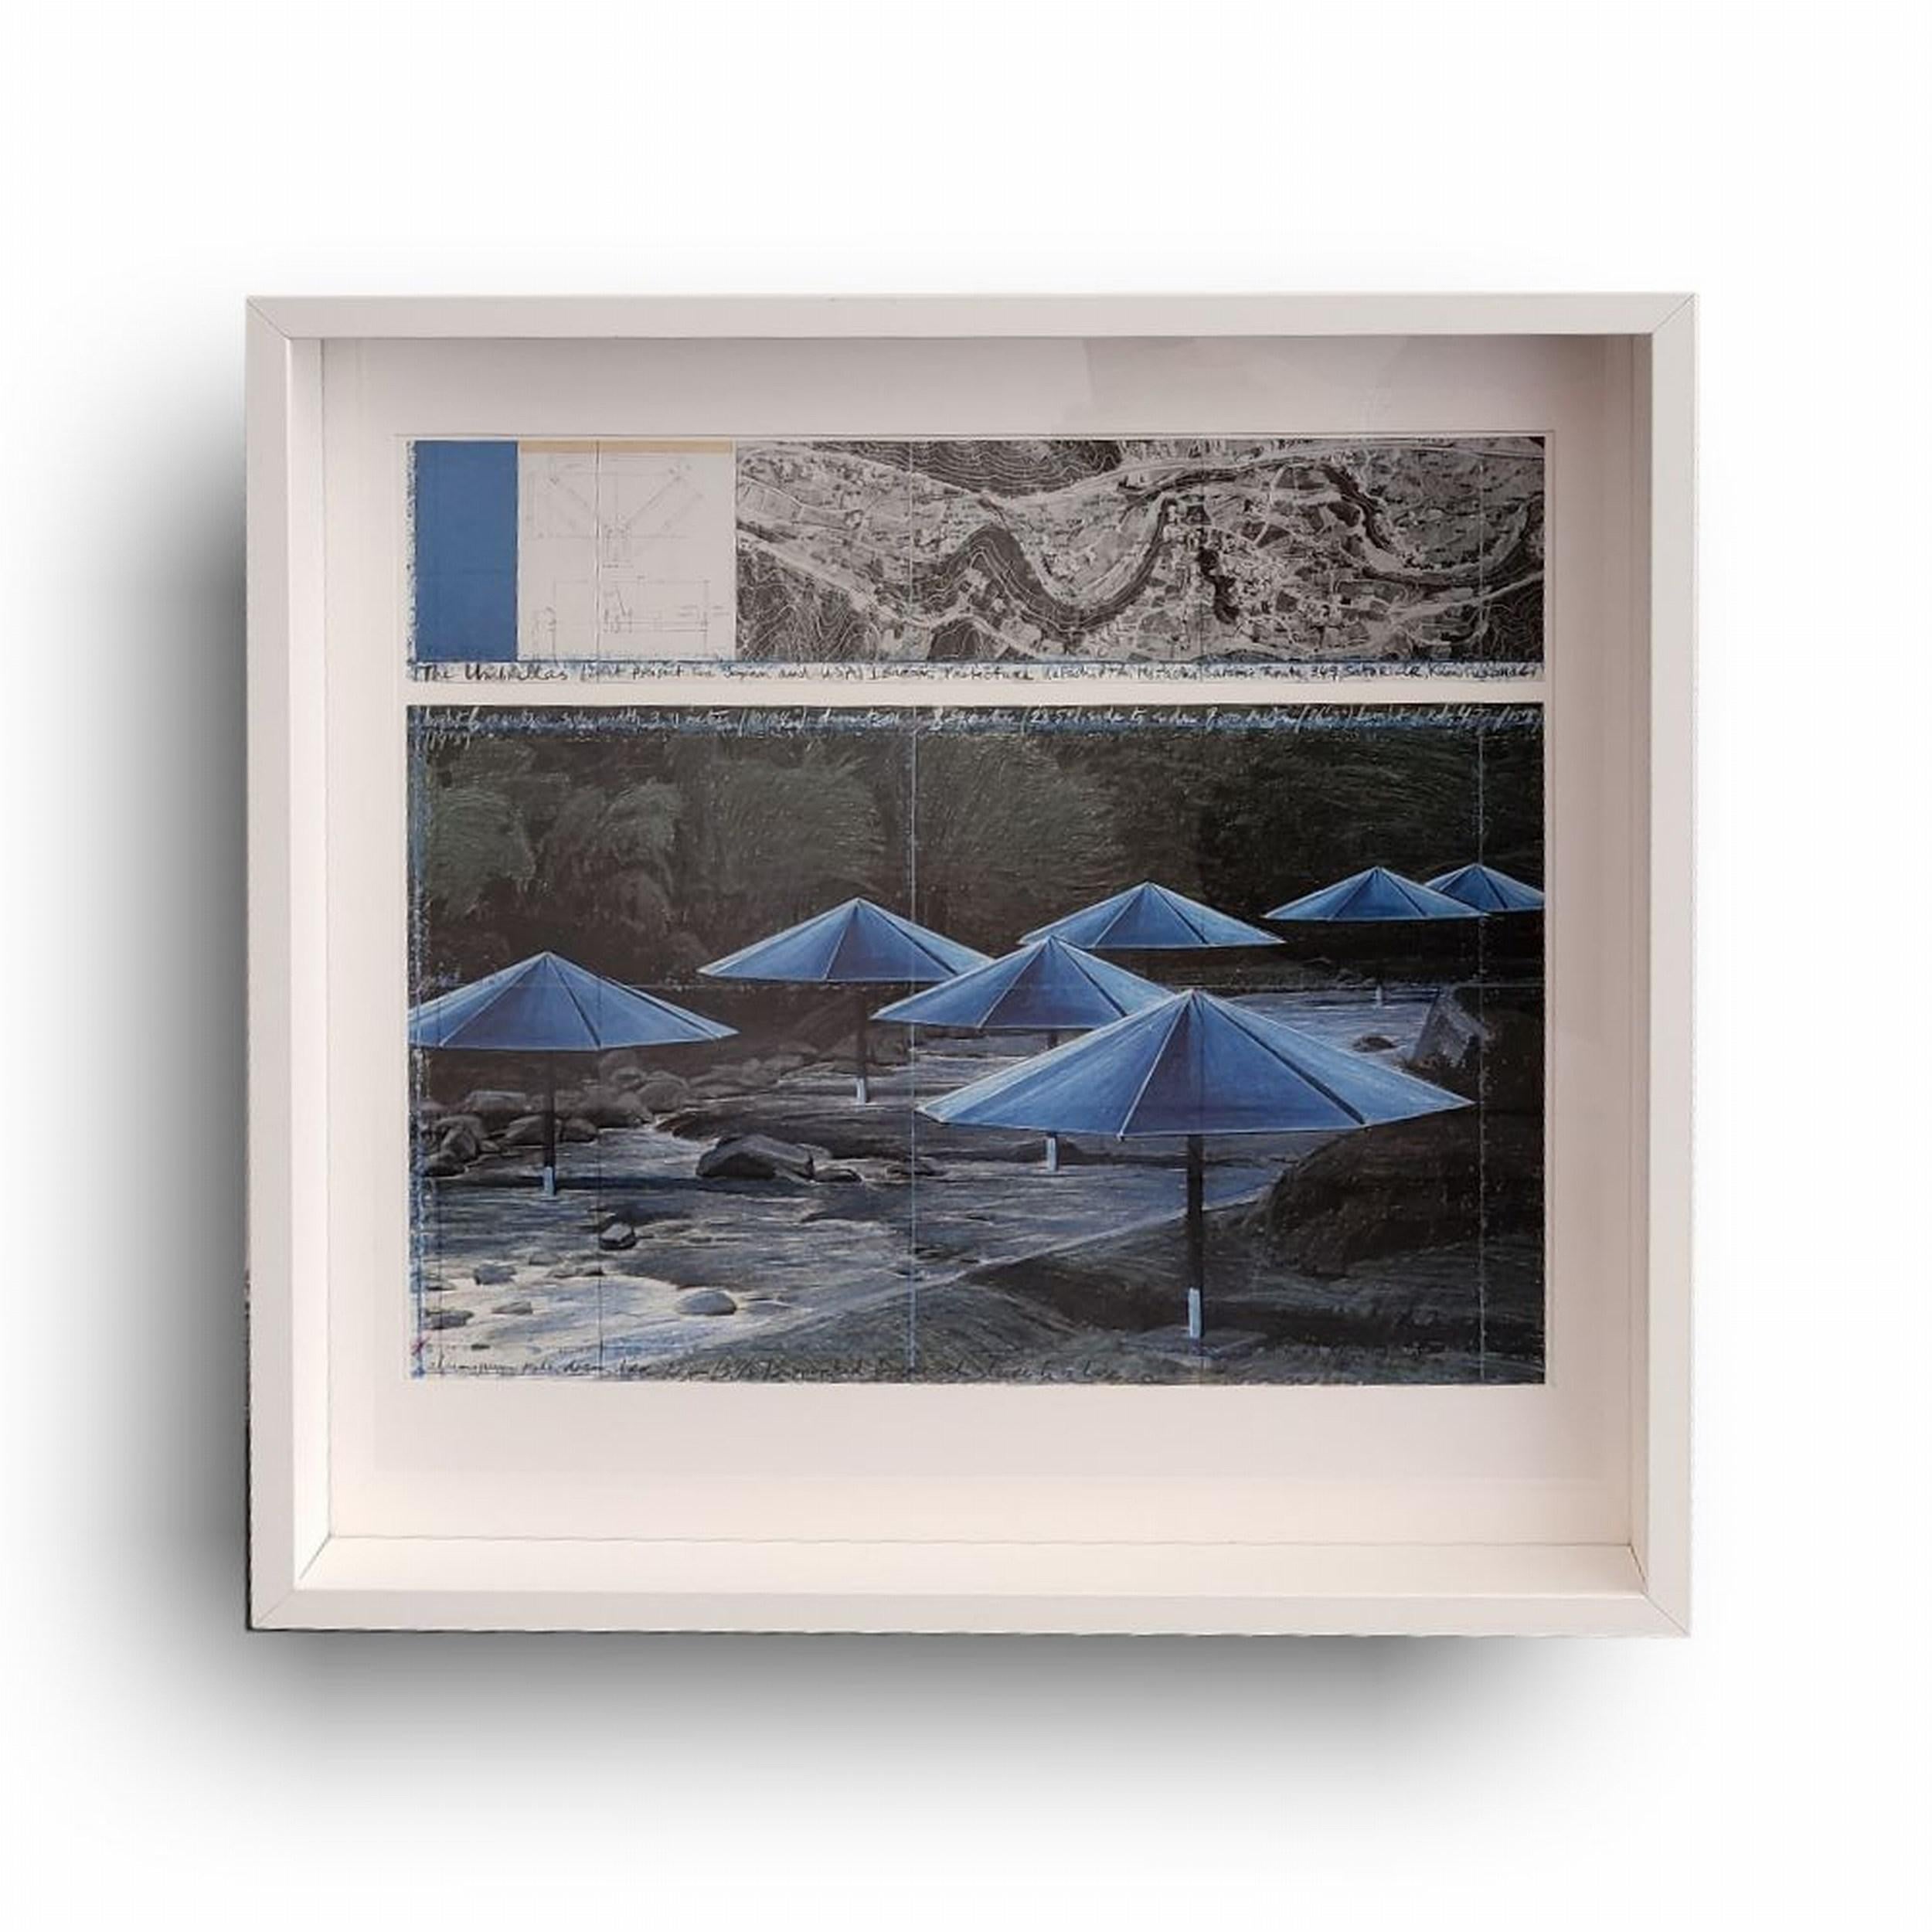 COULD ALSO BE FRAMED IN A BLACK FRAME - SAME SIZE & MODEL

Christo
The Umbrellas (Yellow & Blue)
Lithoserigraphs
Year: 1991
Size: 14.6 × 16.4 on 19.1 × 19.9 inches (EACH)
Framed: 20.5 x 20.5 x 2.5 inches (EACH)
Printer's Chop lower left
Printer: